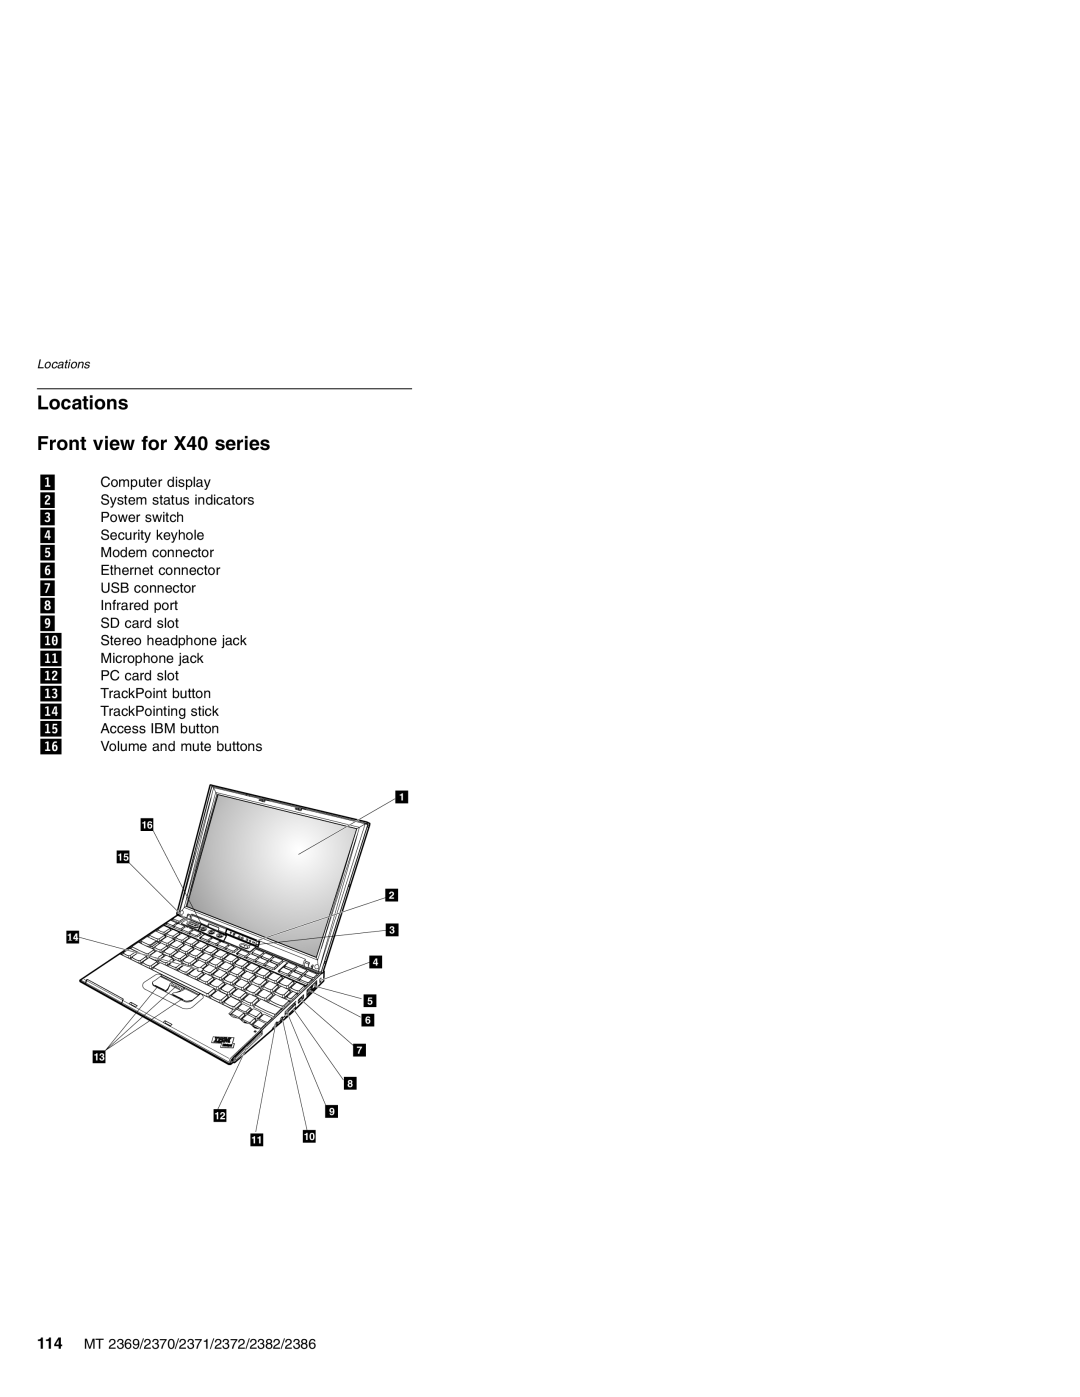 Lenovo MT 2369 manual Locations Front view for X40 series, Computer display System status indicators Power switch 